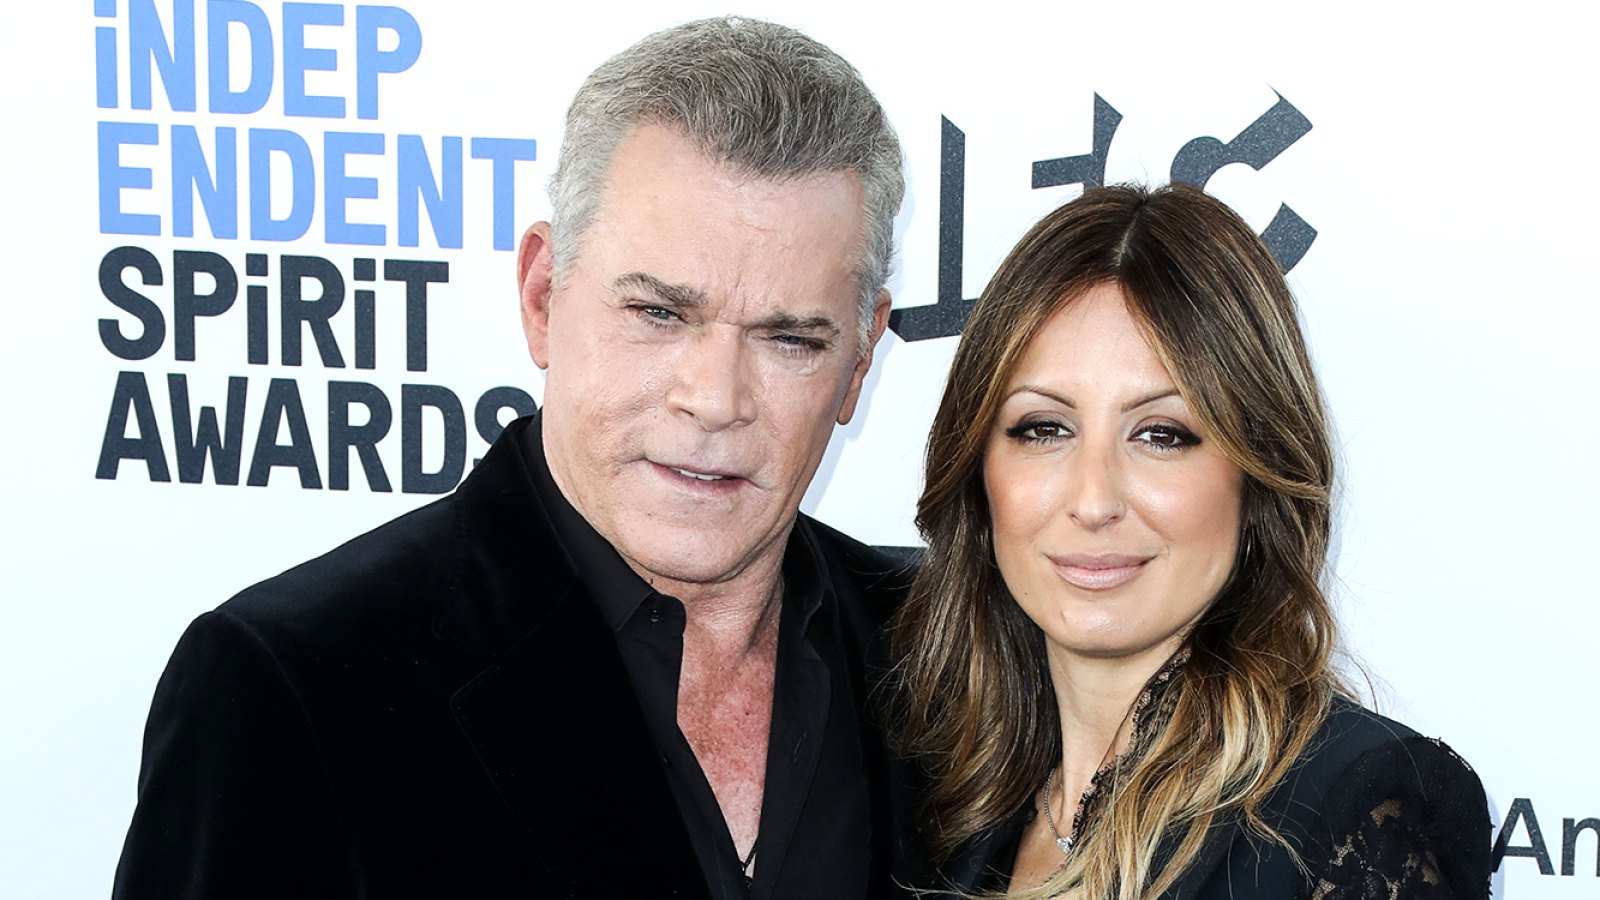 Ray Liotta’s Fiancee Jacy Nittolo Speaks Out After the 'Goodfellas’ Actor's Death: ‘We Were Inseparable’